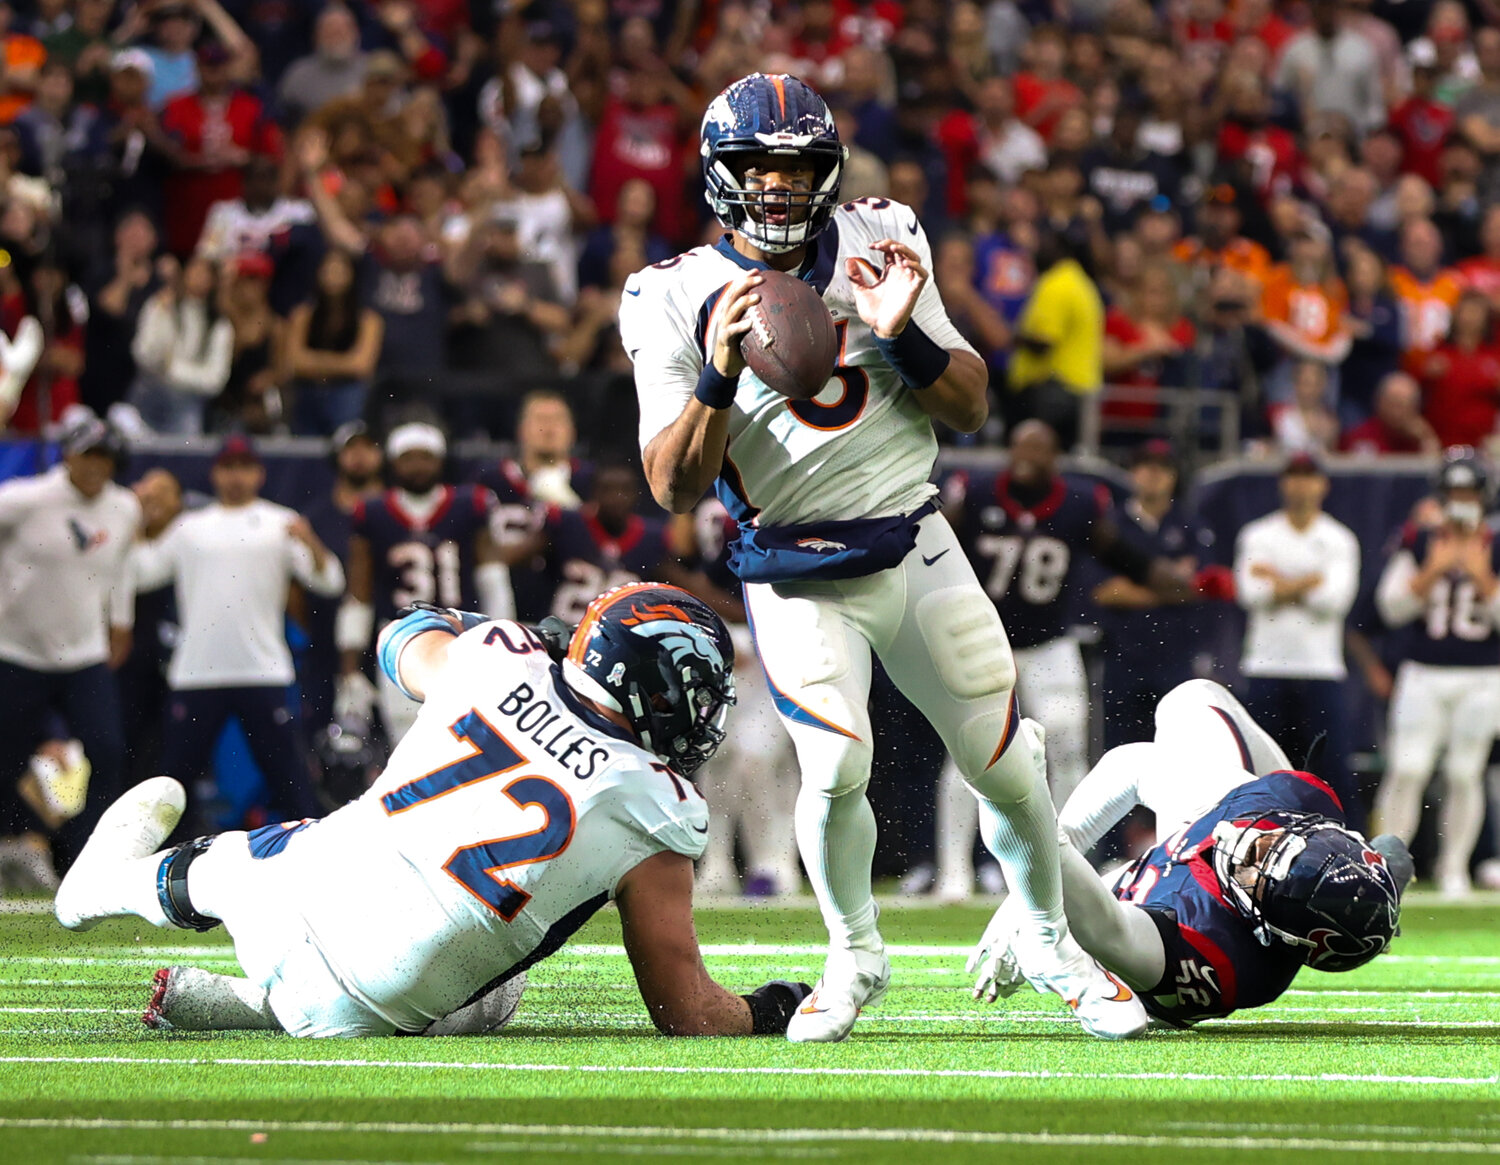 Broncos quarterback Russell Wilson (3) shakes off Texans defensive end Jonathan Greenard (52) to get off a pass that was intercepted in the end zone, sealing a 22-17 win for the Texans in an NFL game on December 3, 2023 in Houston. The Texans won, 22-17.